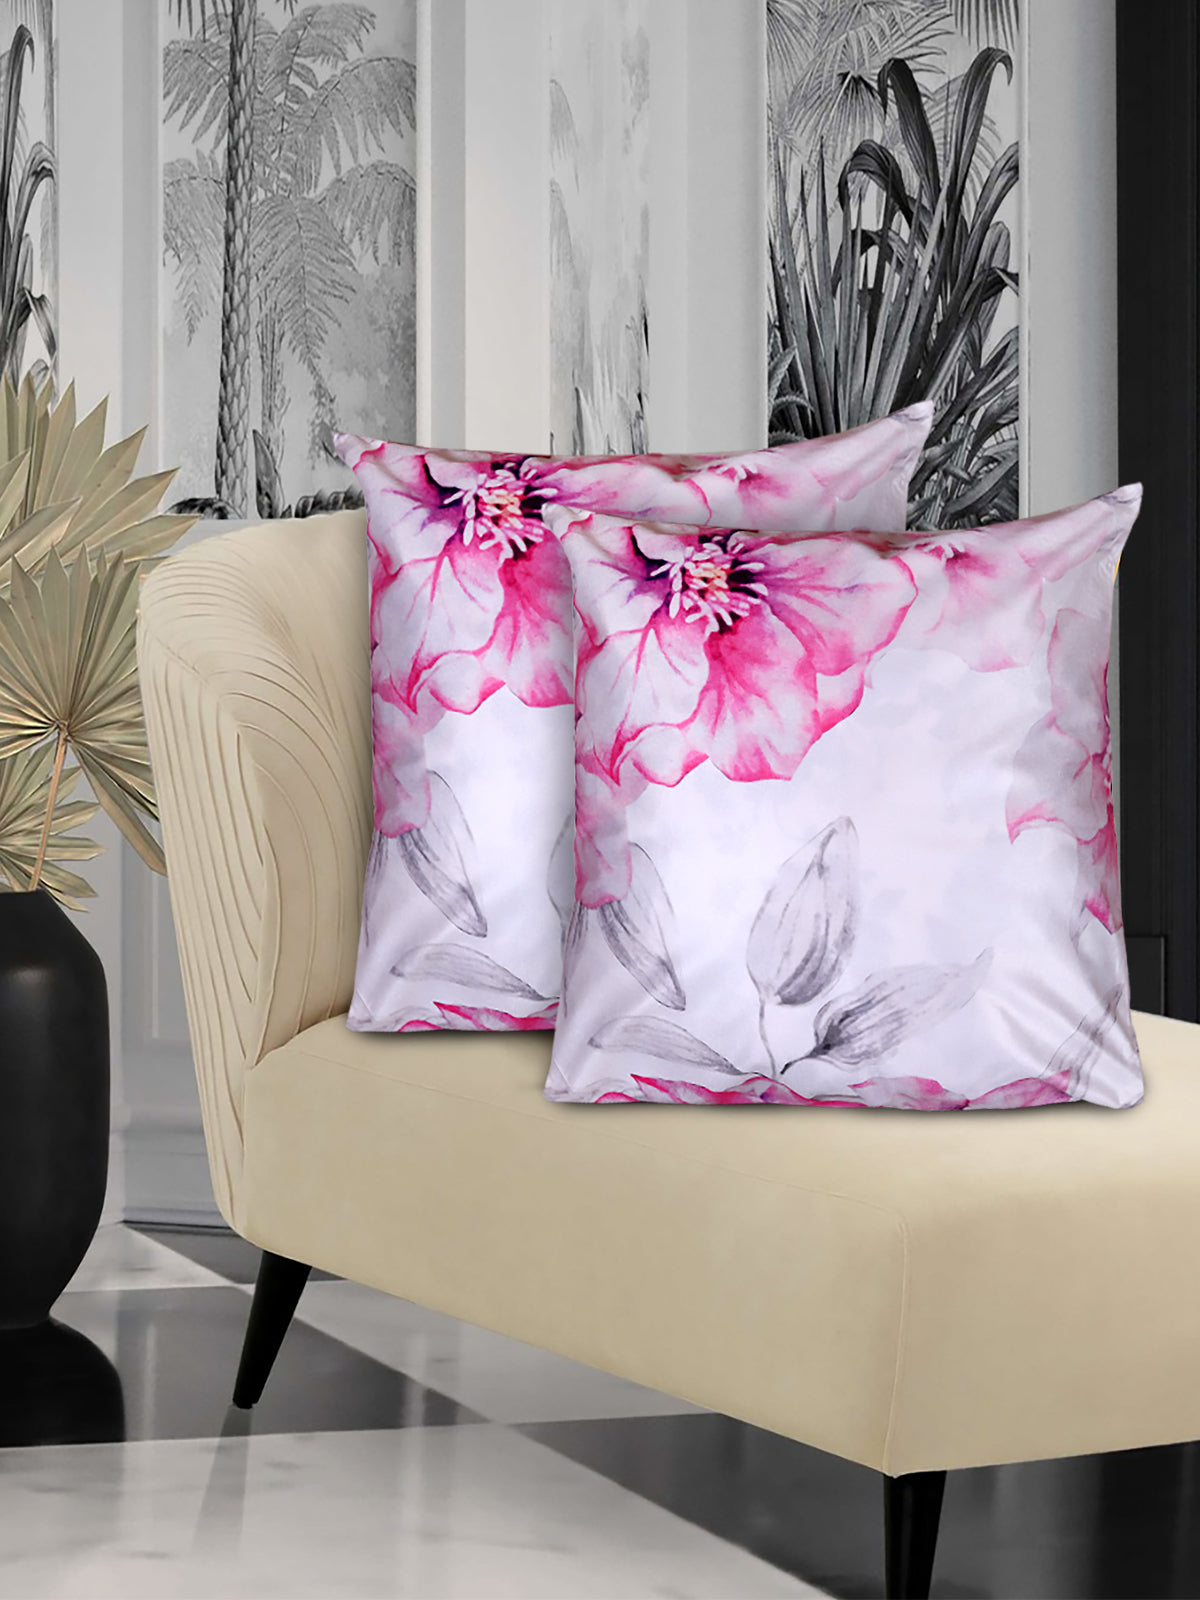 Pink and Off White Set of 2 Cushion Covers 24x24 Inch